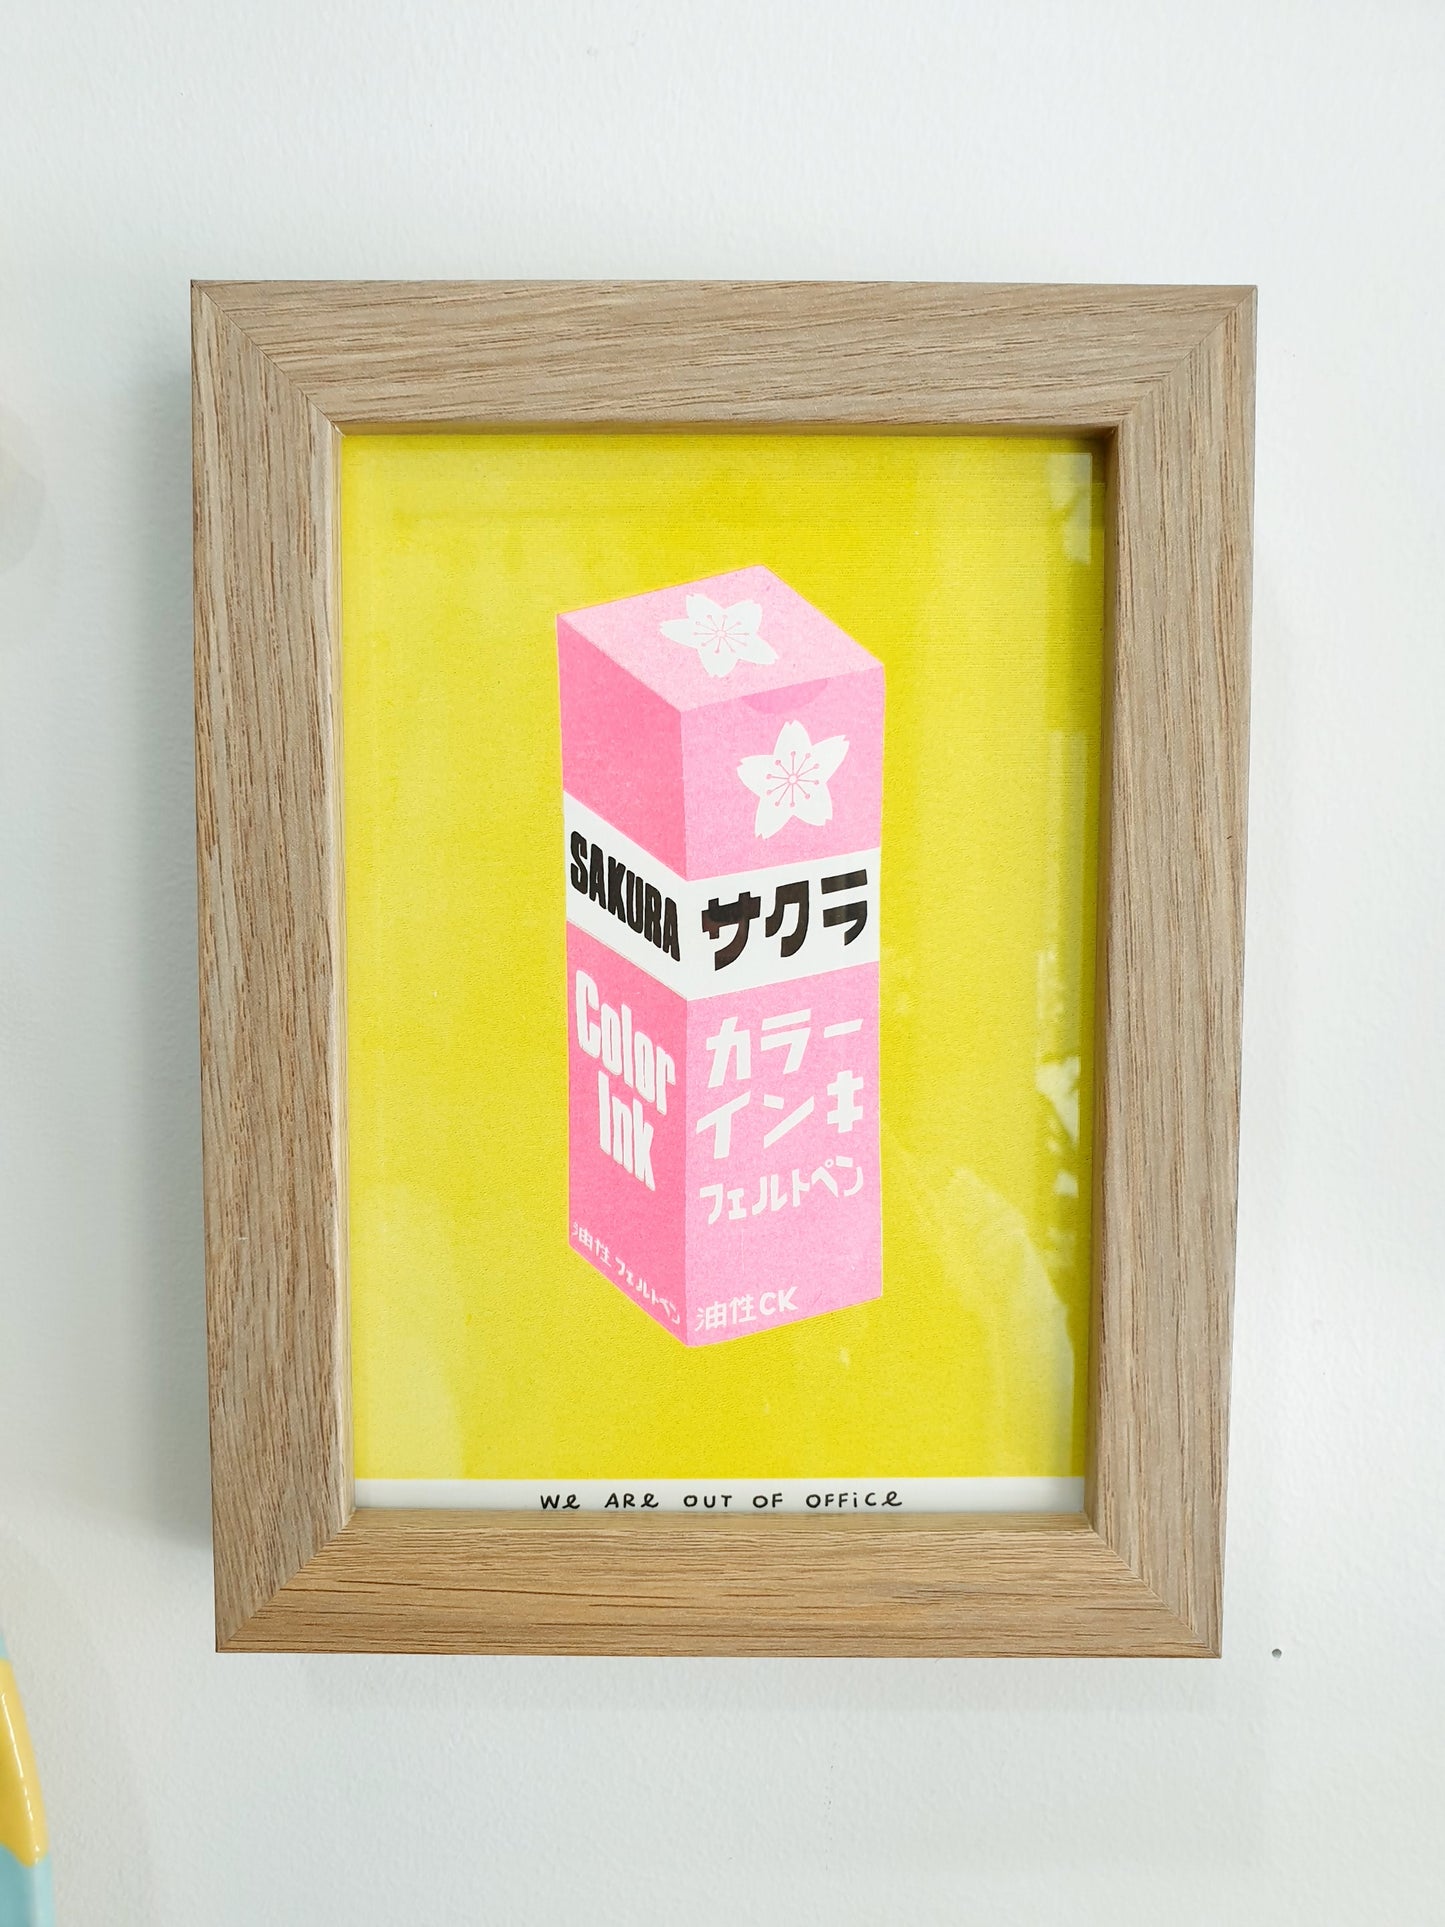 'A very bright bottle of Japanese sakura ink' - FRAMED risograph print by 'We are out of office'